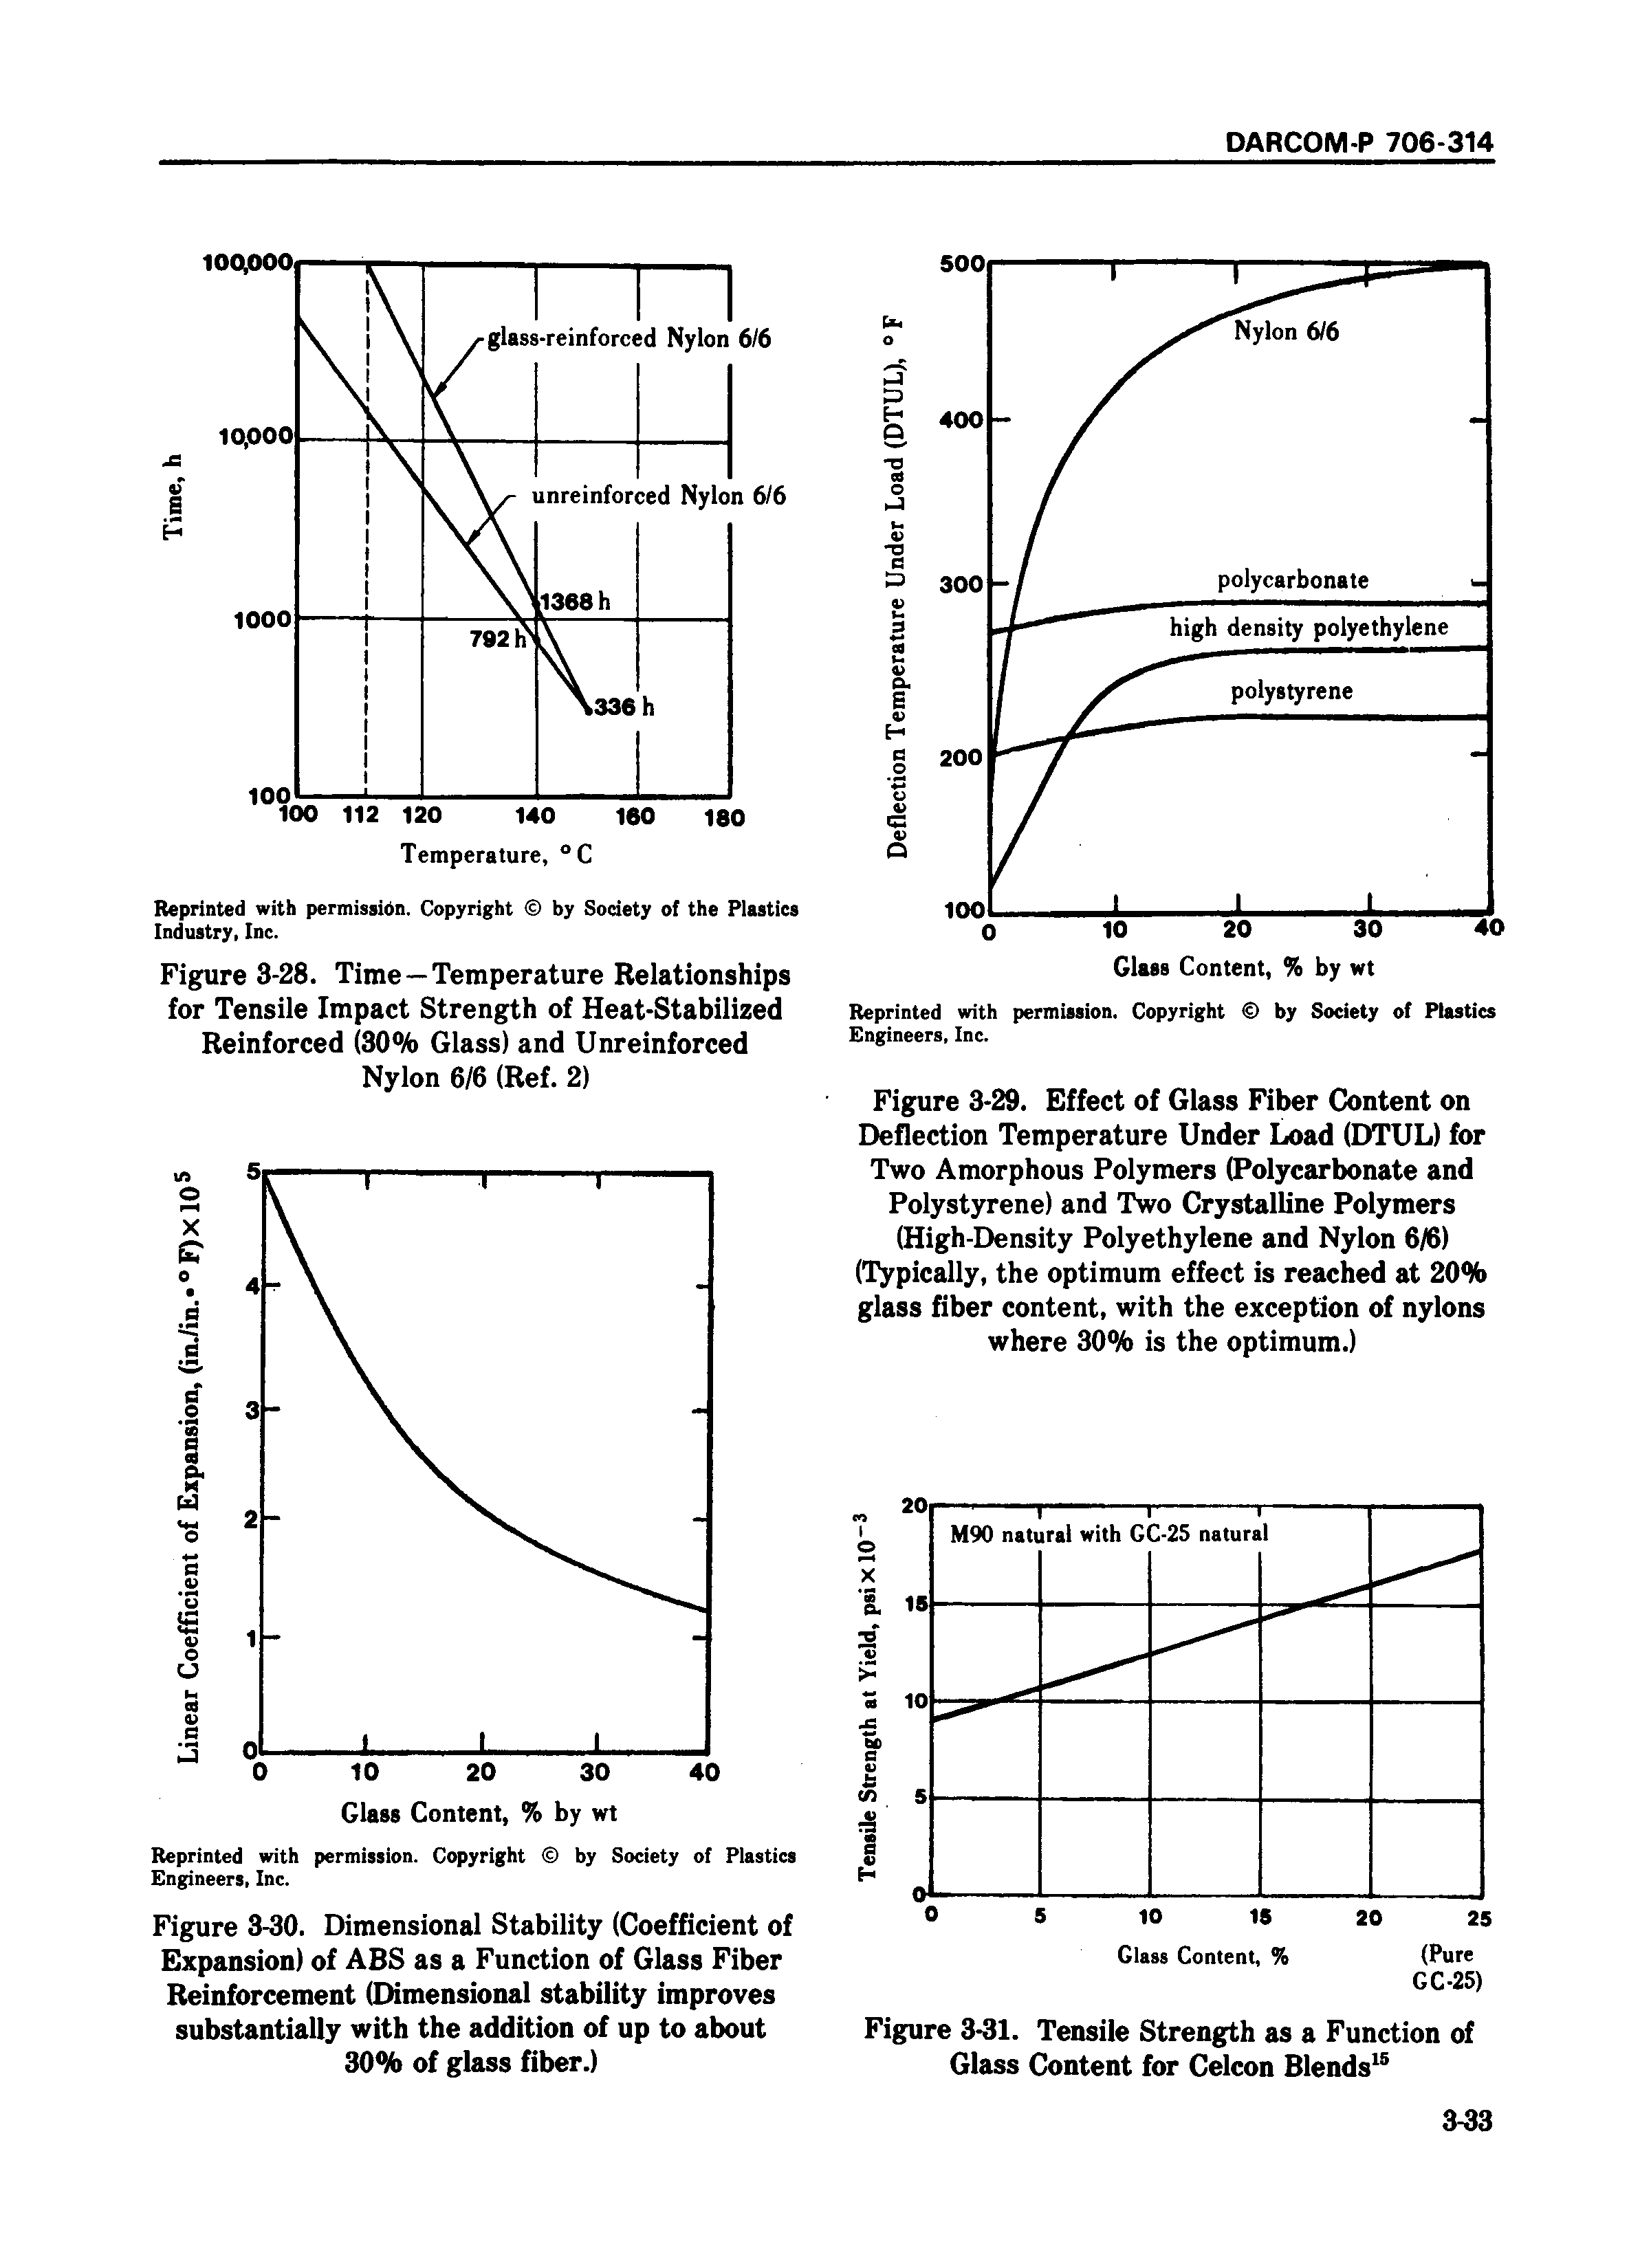 Figure 3-29. Effect of Glass Fiber Content on Deflection Temperature Under Load (DTUL) for Two Amorphous Polymers (Polycarbonate and Polystyrene) and Two Crystalline Polymers (High-Density Polyethylene and Nylon 6/6) (Typically, the optimum effect is reached at 20% glass fiber content, with the exception of nylons where 30% is the optimum.)...